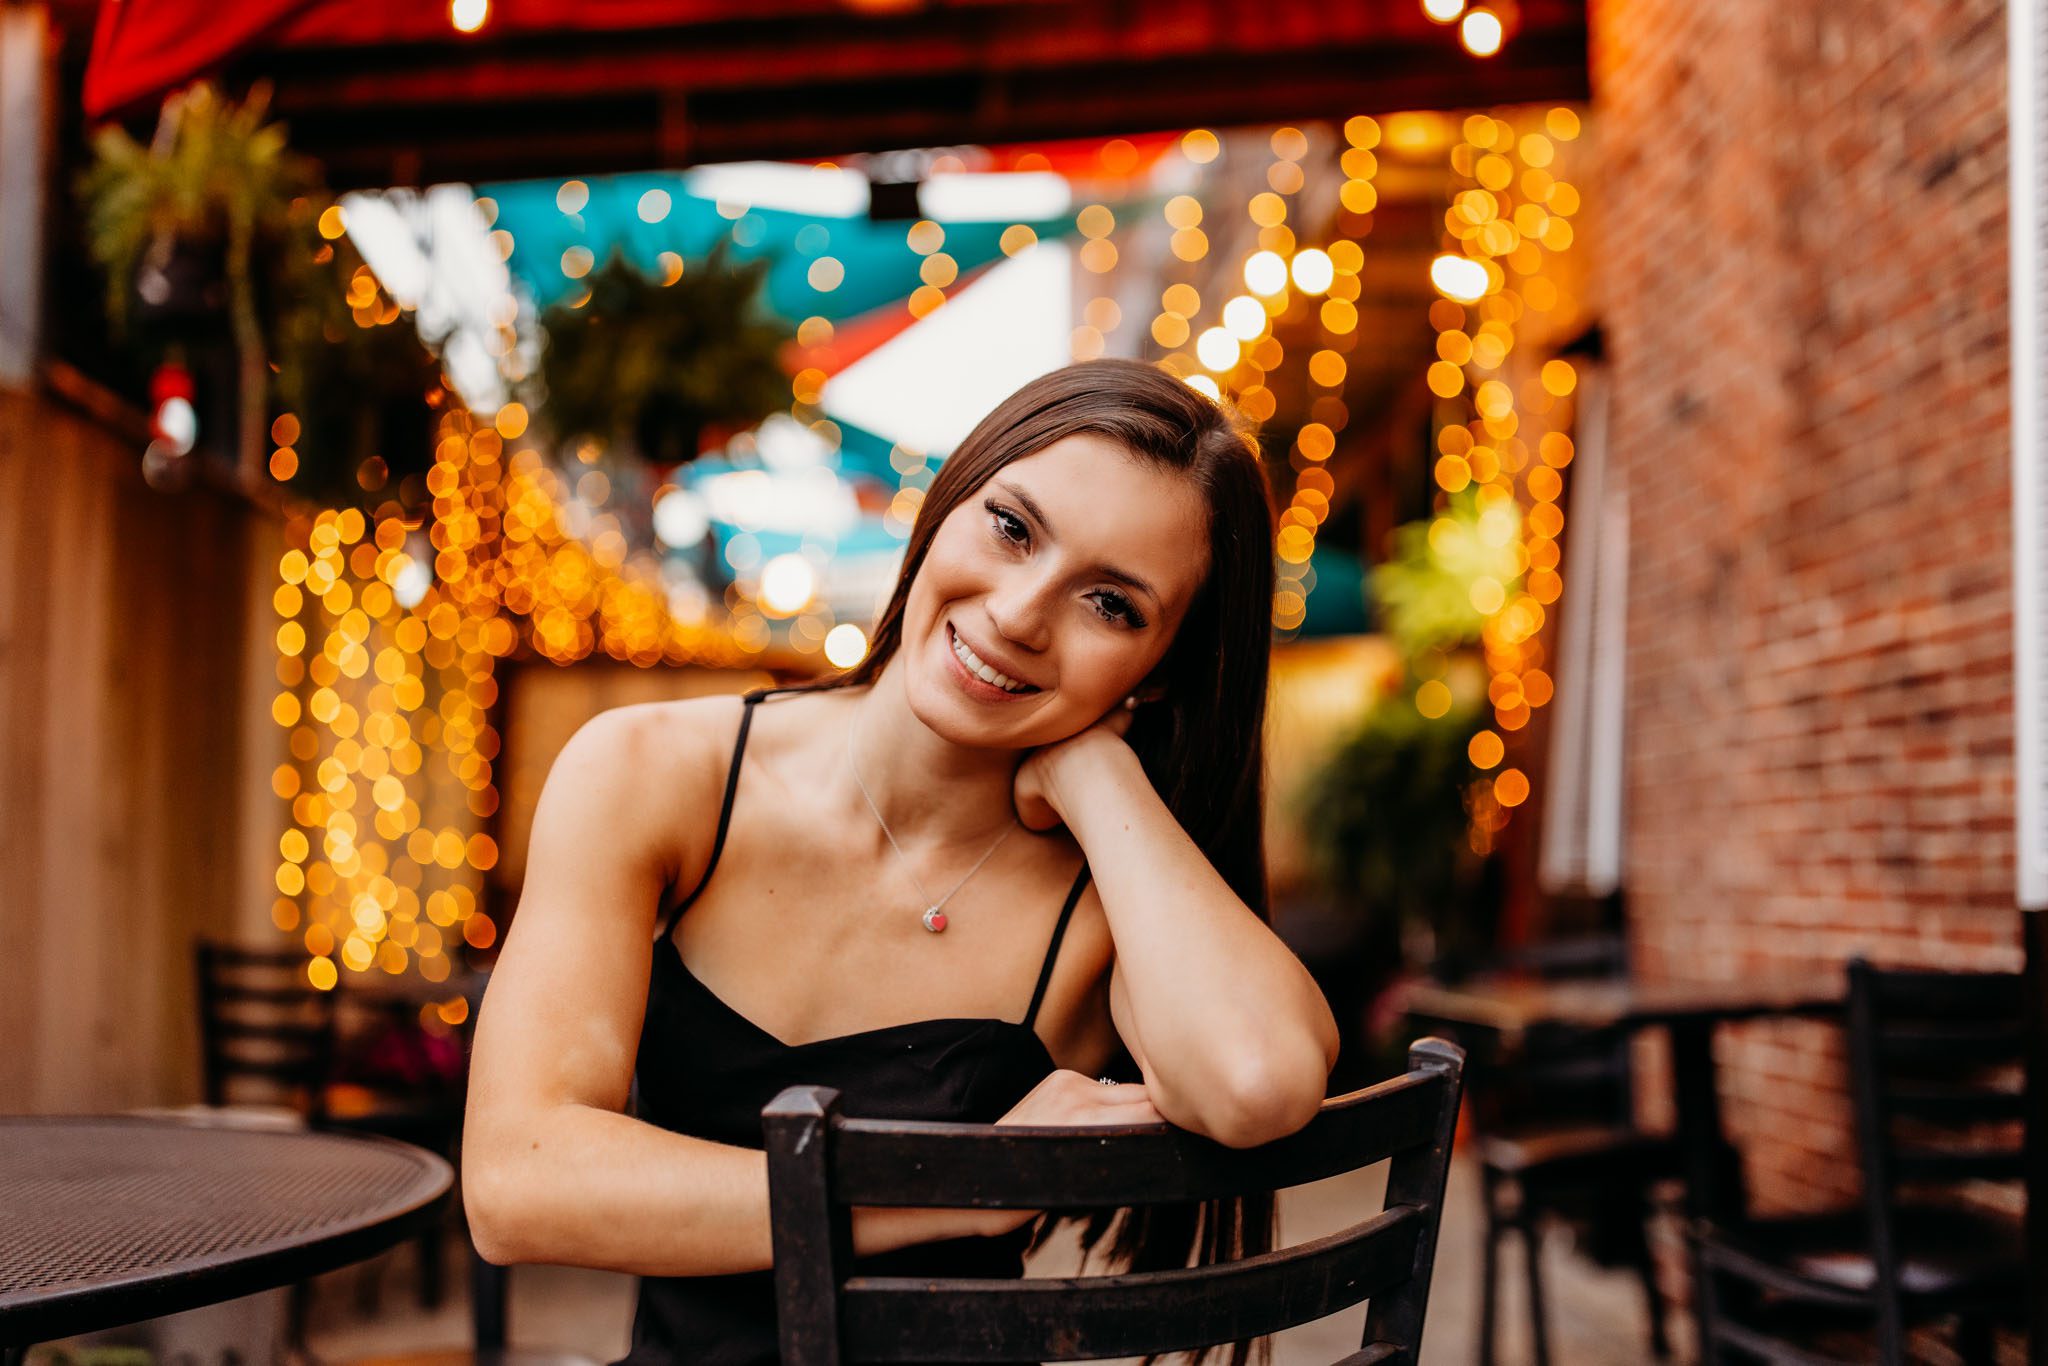 Summer senior portrait of a young woman in a black dress at a restaurant patio in Massachusetts photographed by Sean Wytrwal of J&S Photography